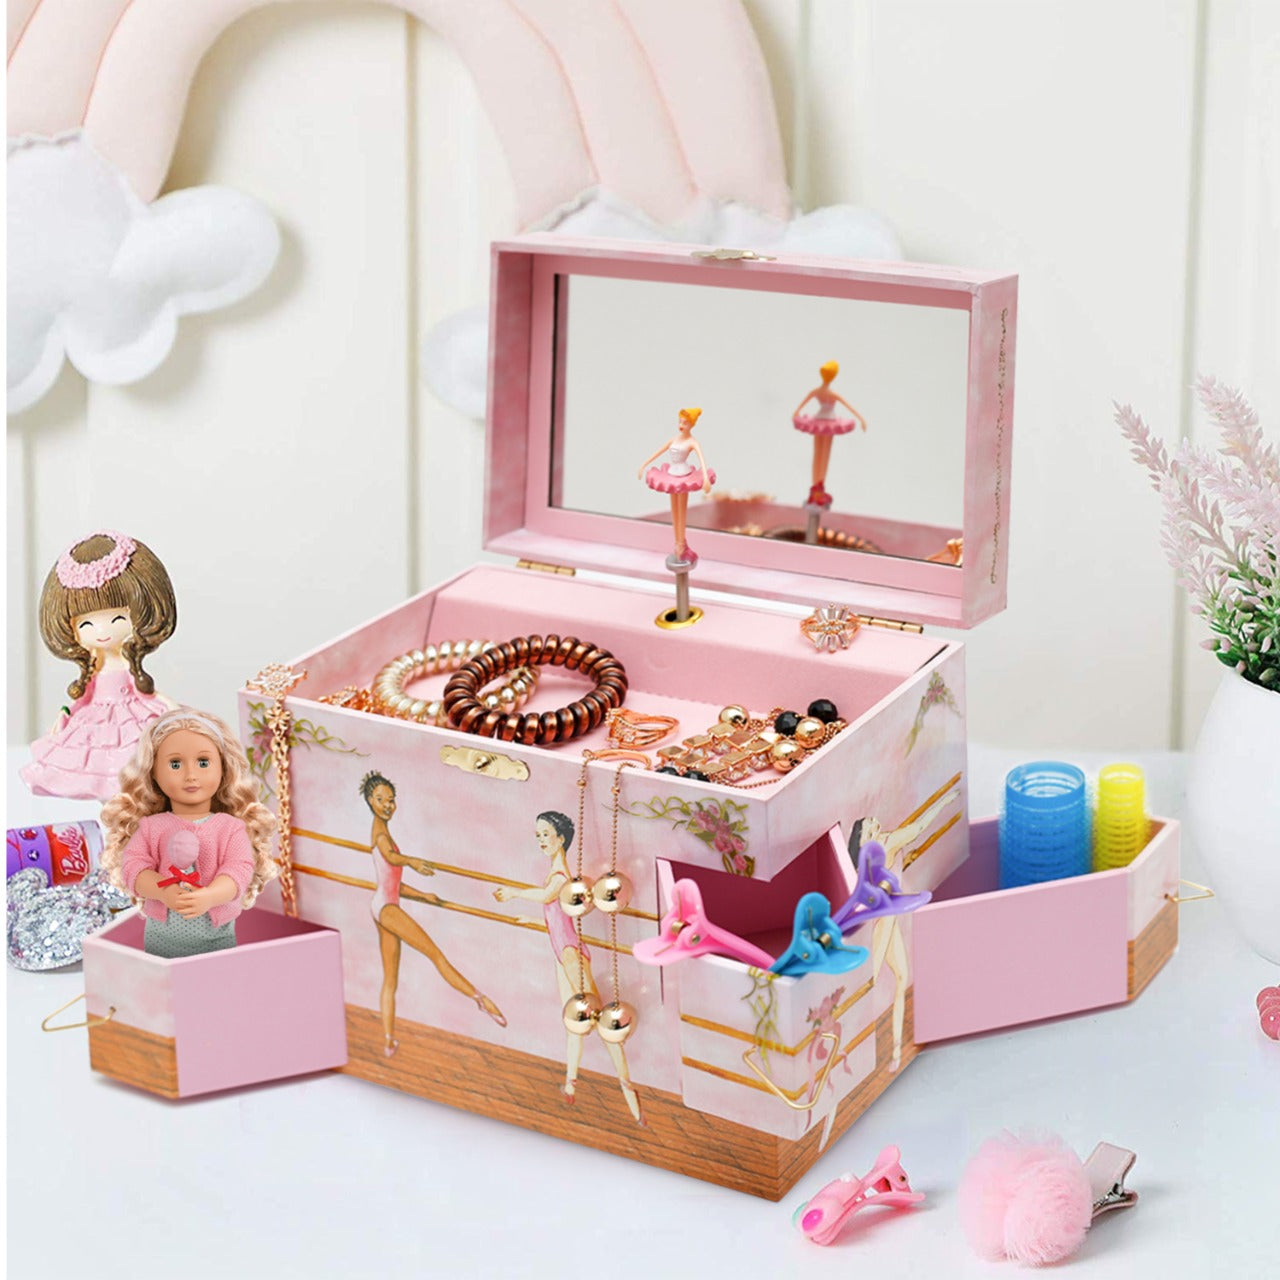 Making a MUSICAL wooden BOX with ballerina! Step by Step 